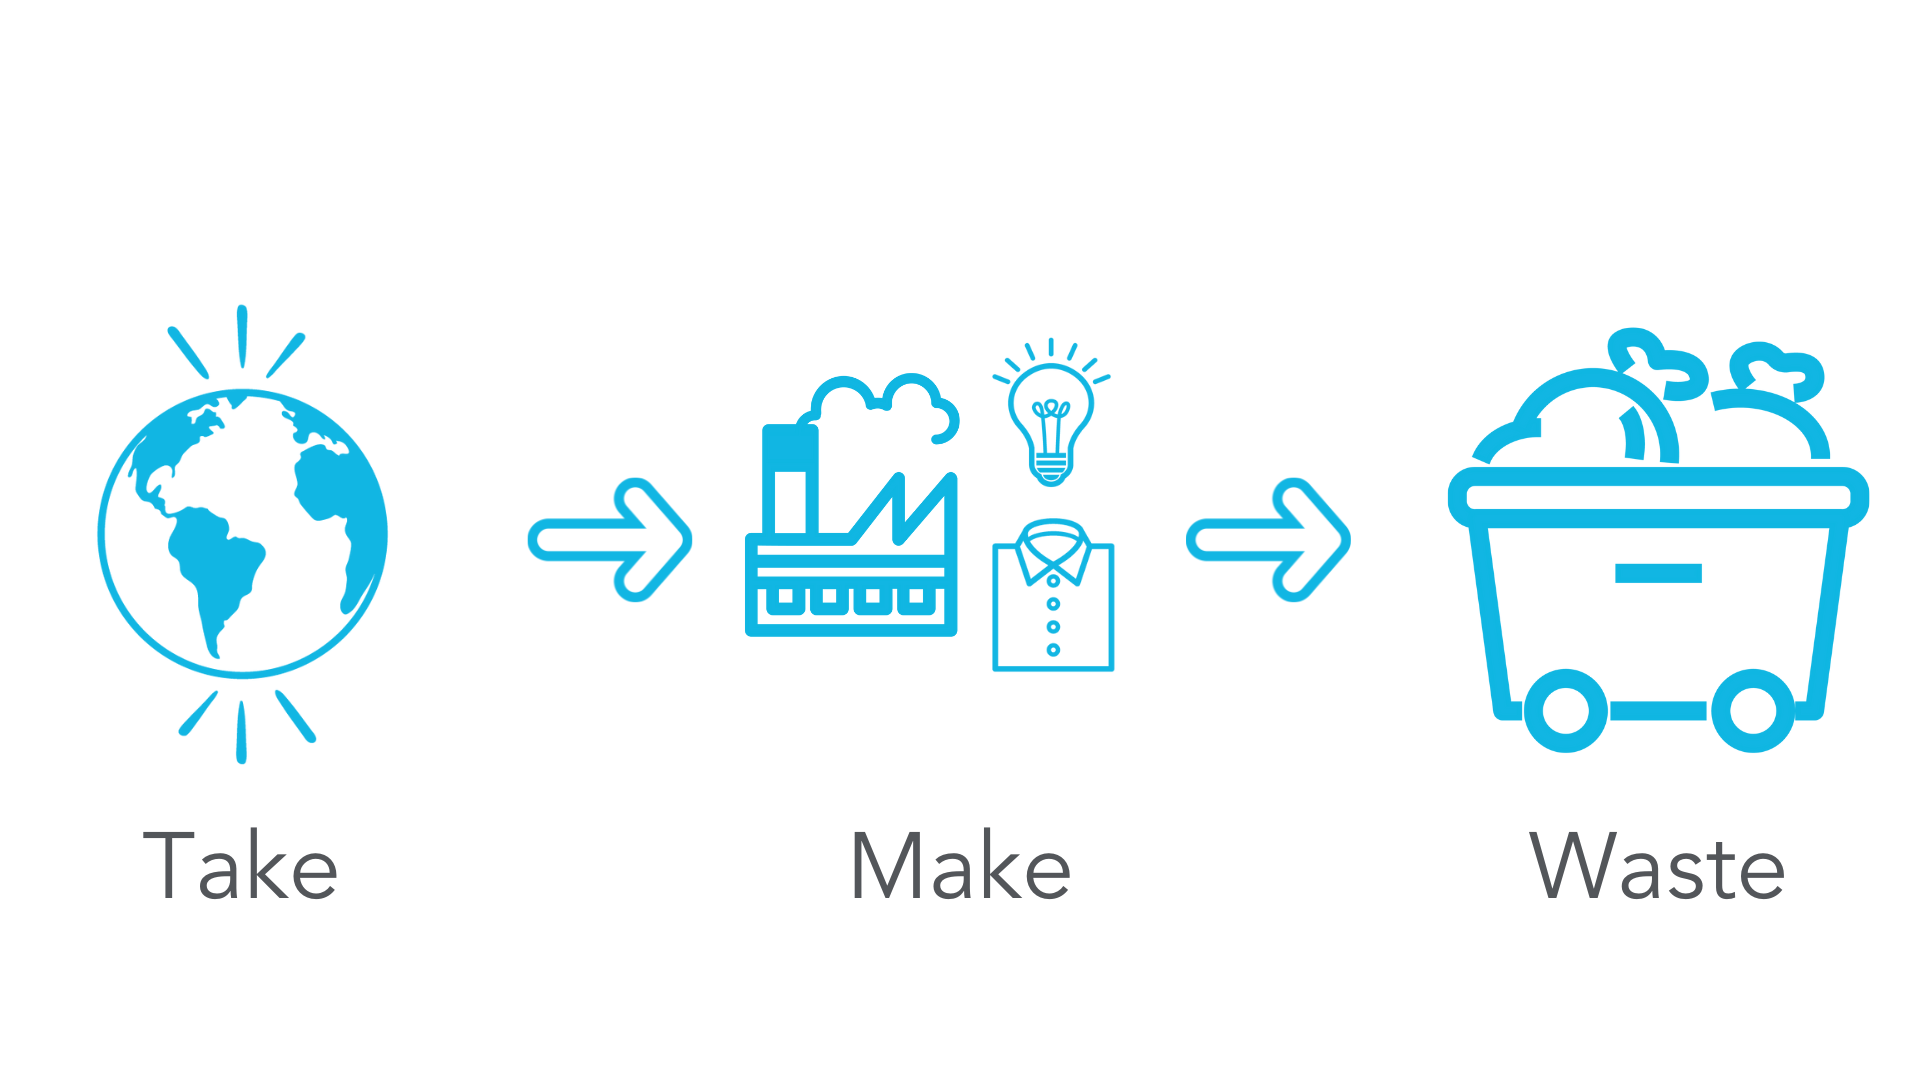 Take-make-waste linear infographic. Icons from left to right: take - a globe; make - a factory, light bulb, and shirt; waste - a dumpster containing two full garbage bags